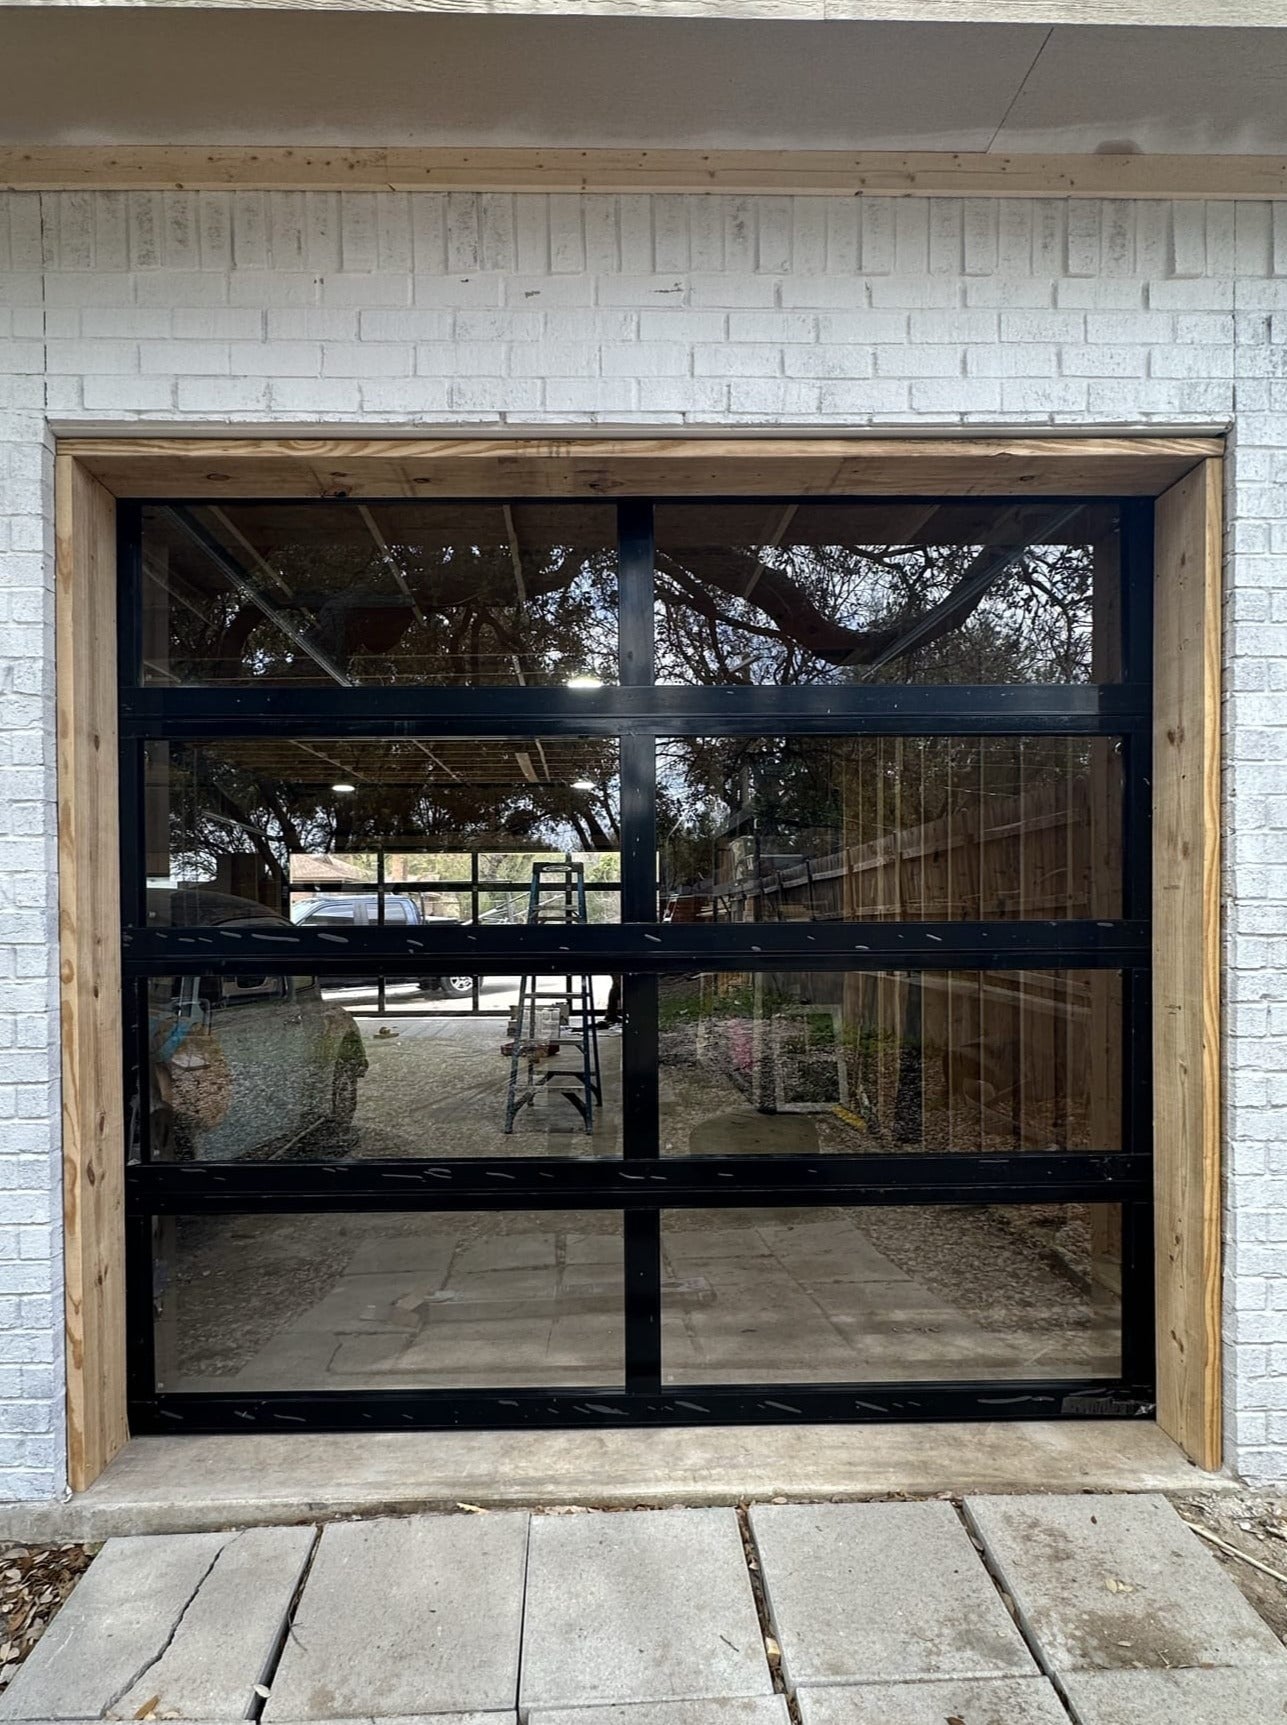 8 FT Wide By 7 FT Tall Full View Garage Door Matt Black Finish With Clear Glass